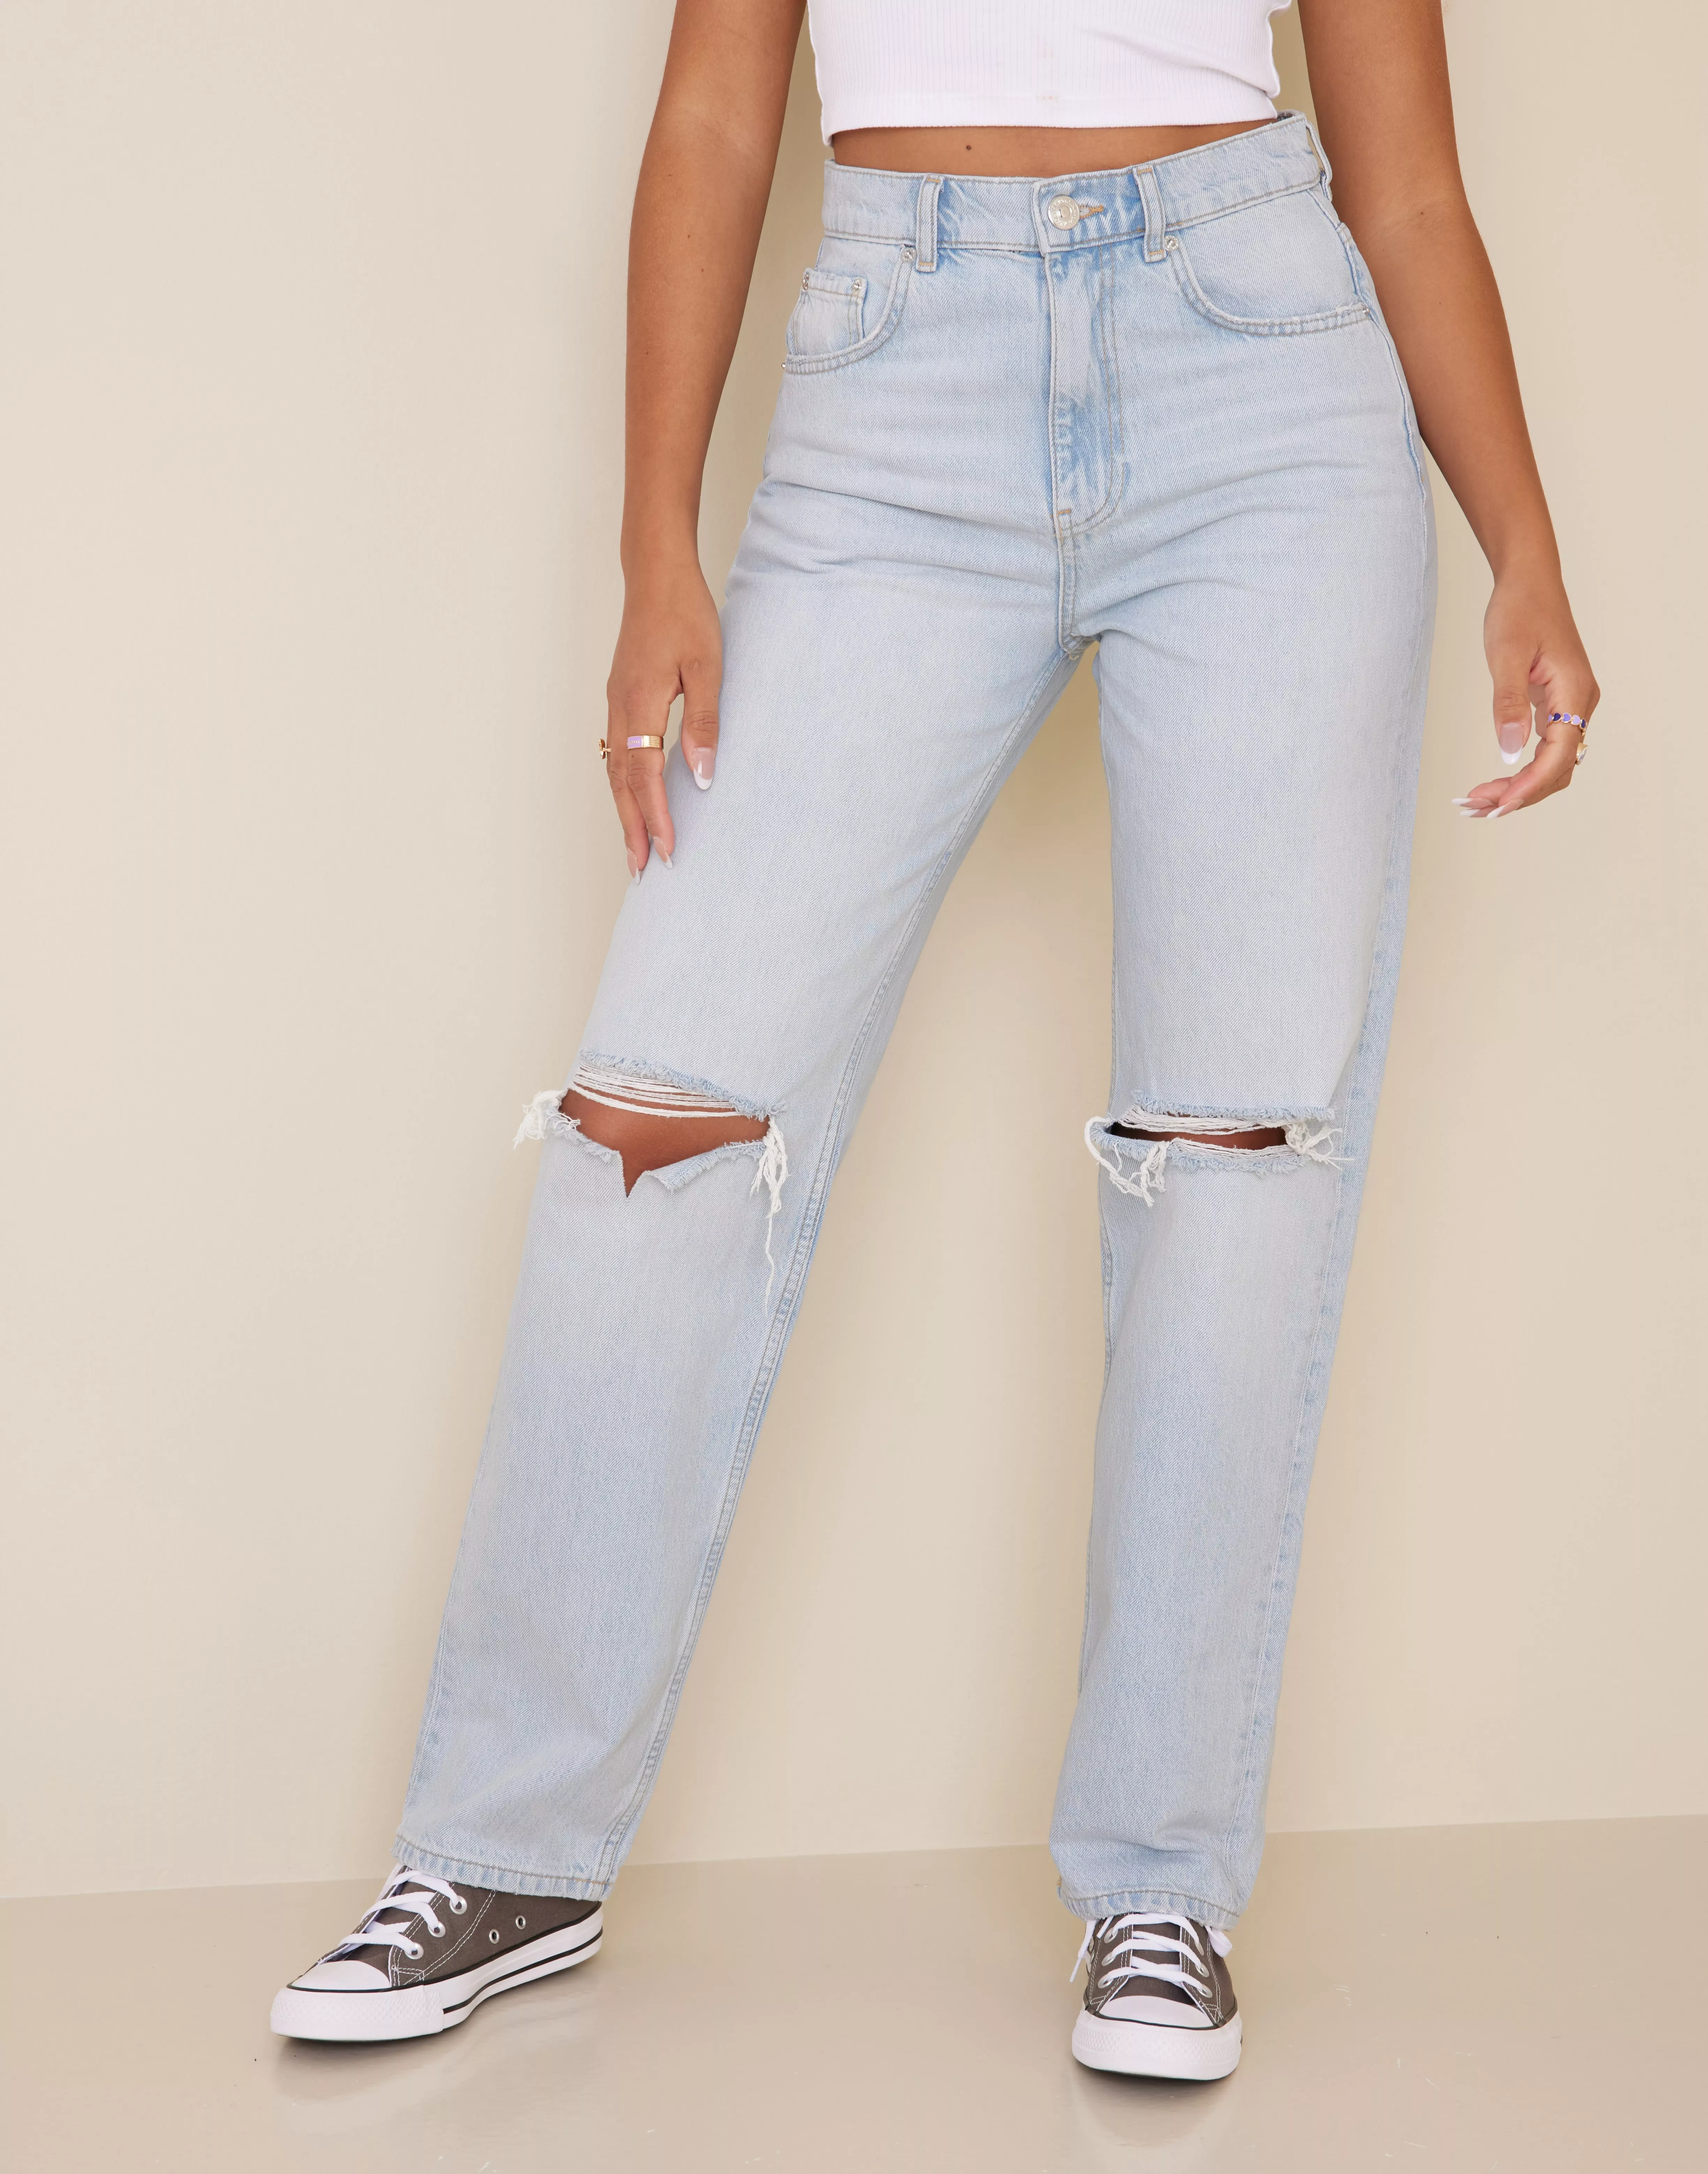 Buy Gina Tricot Low waist bootcut jeans - Sky Blue